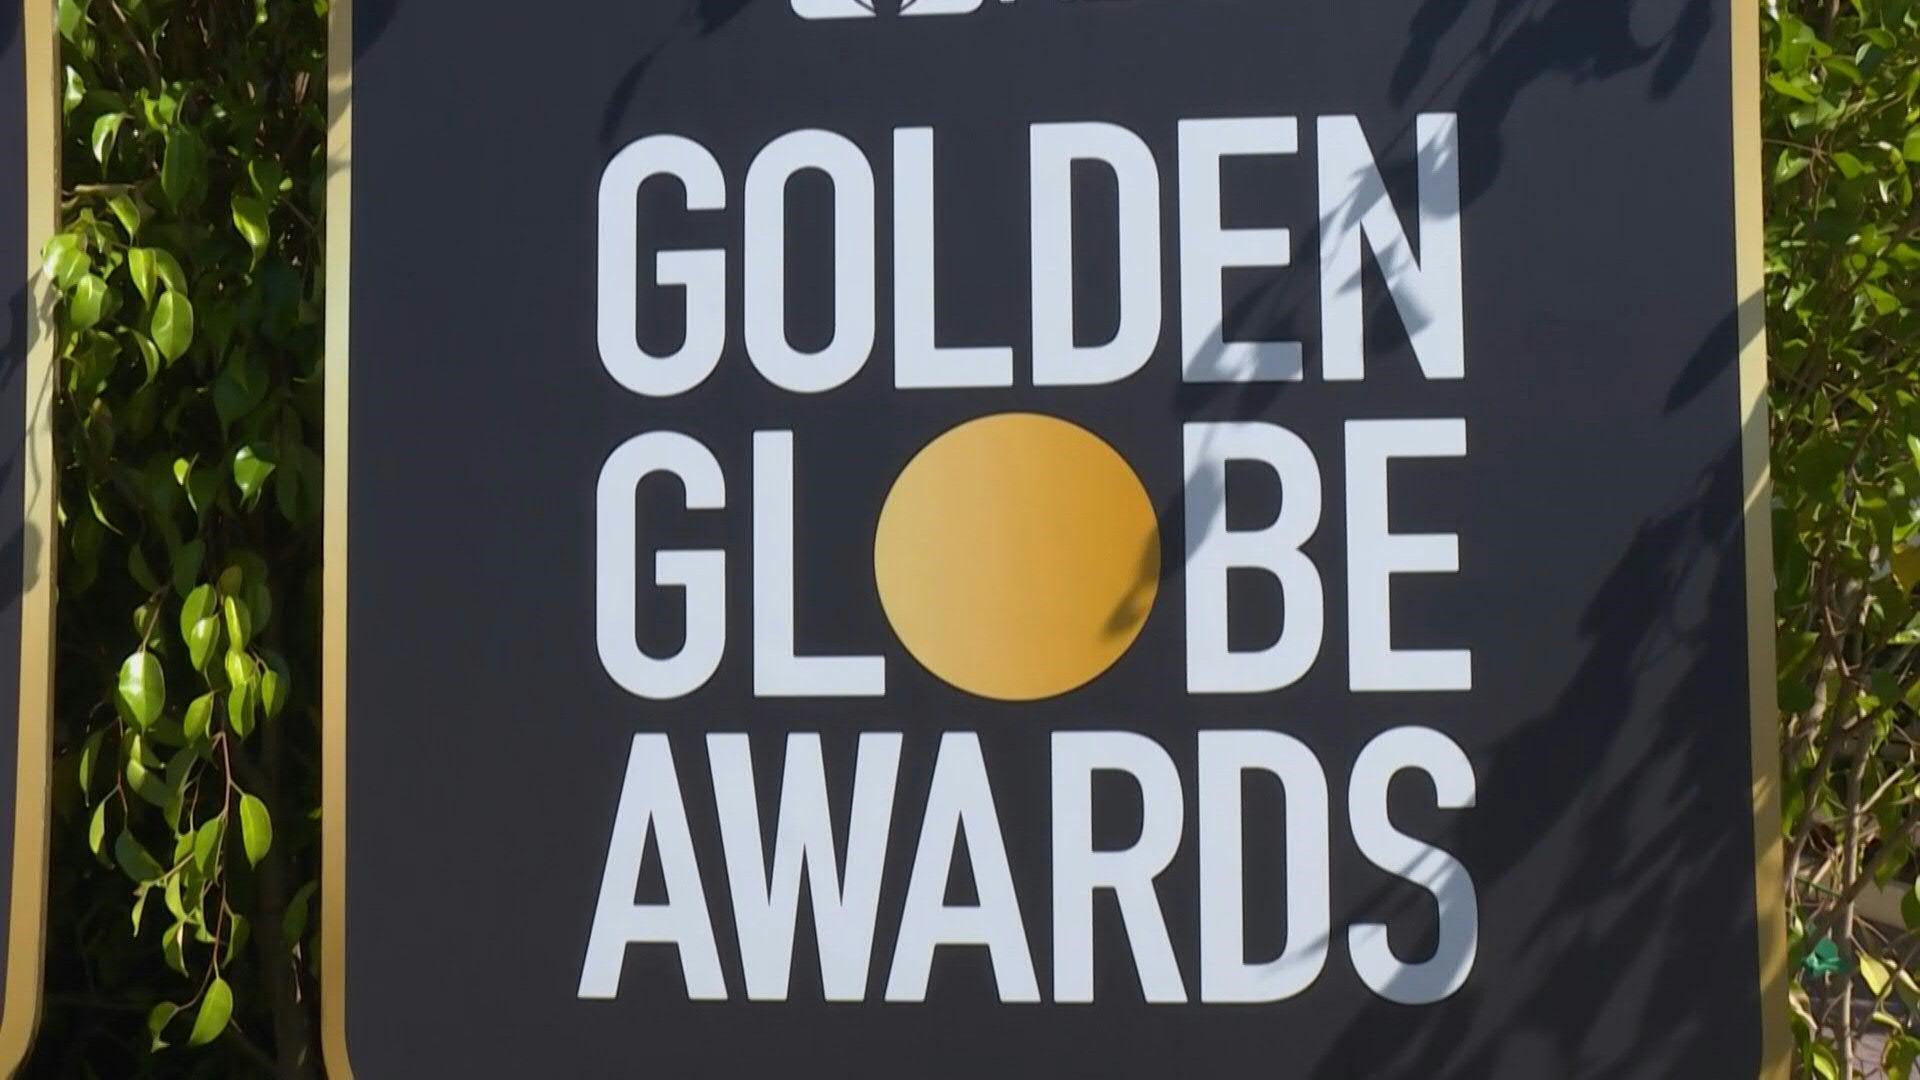 Dotted with scandals, the Golden Globes announced on Tuesday their return to television in 2023, where they will try to recover their former splendor after a last edition widely shunned by Hollywood.